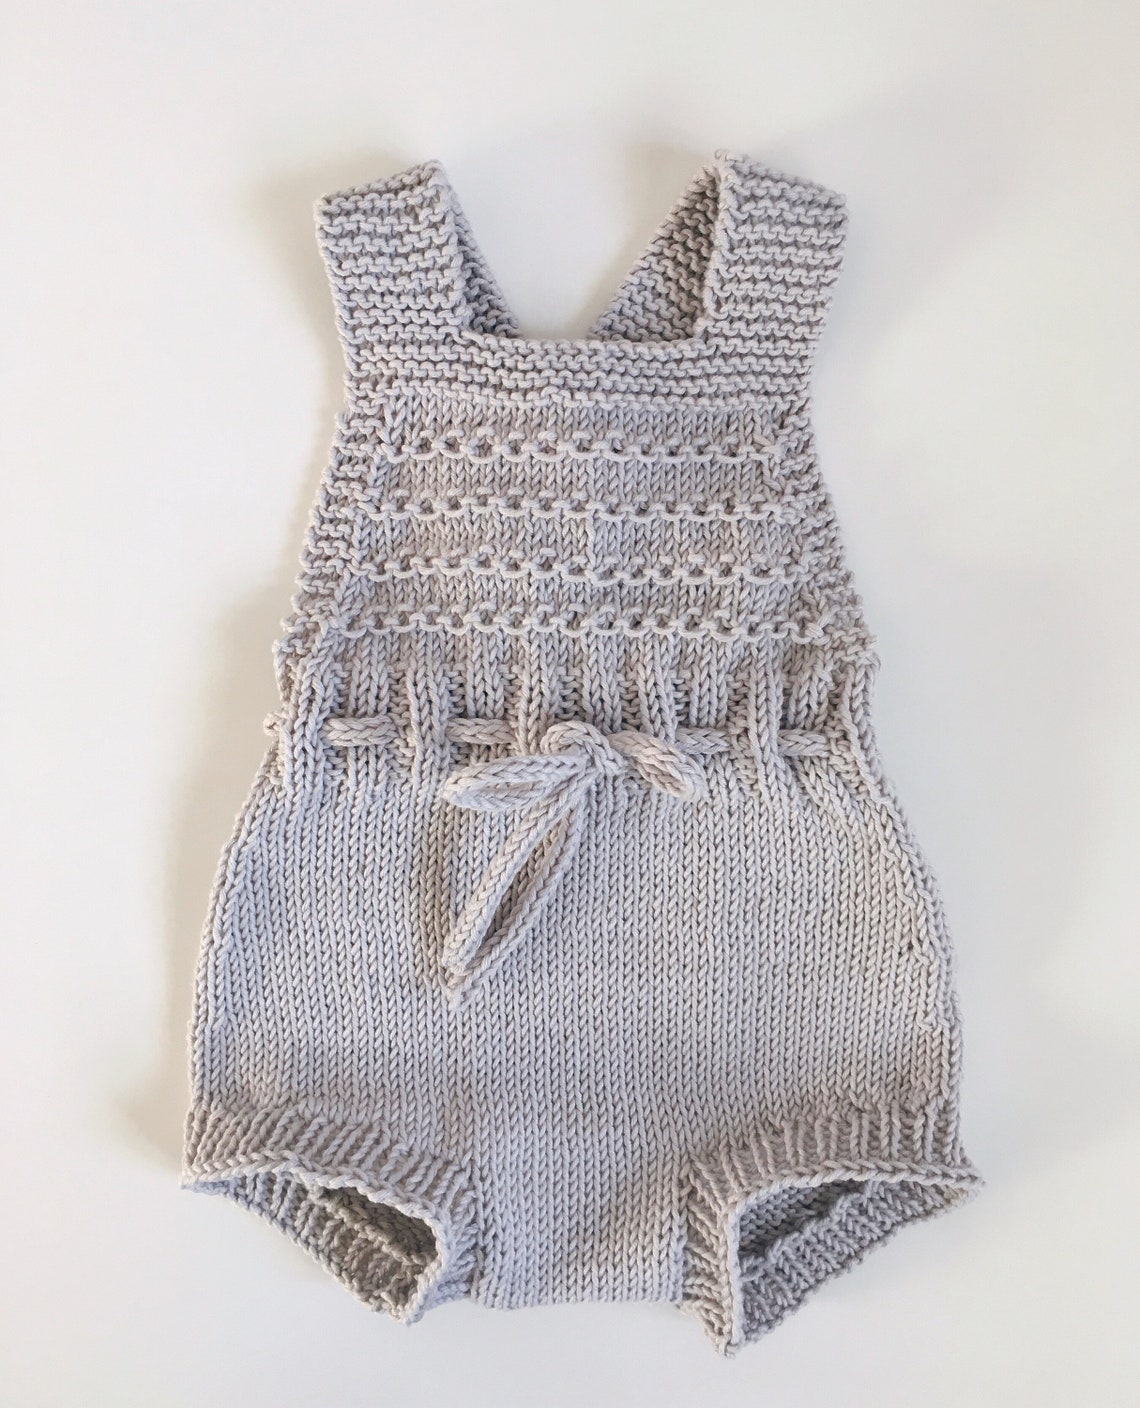 Soft Cotton Knitted Baby Dungarees Gender Neutral Playsuit | Etsy